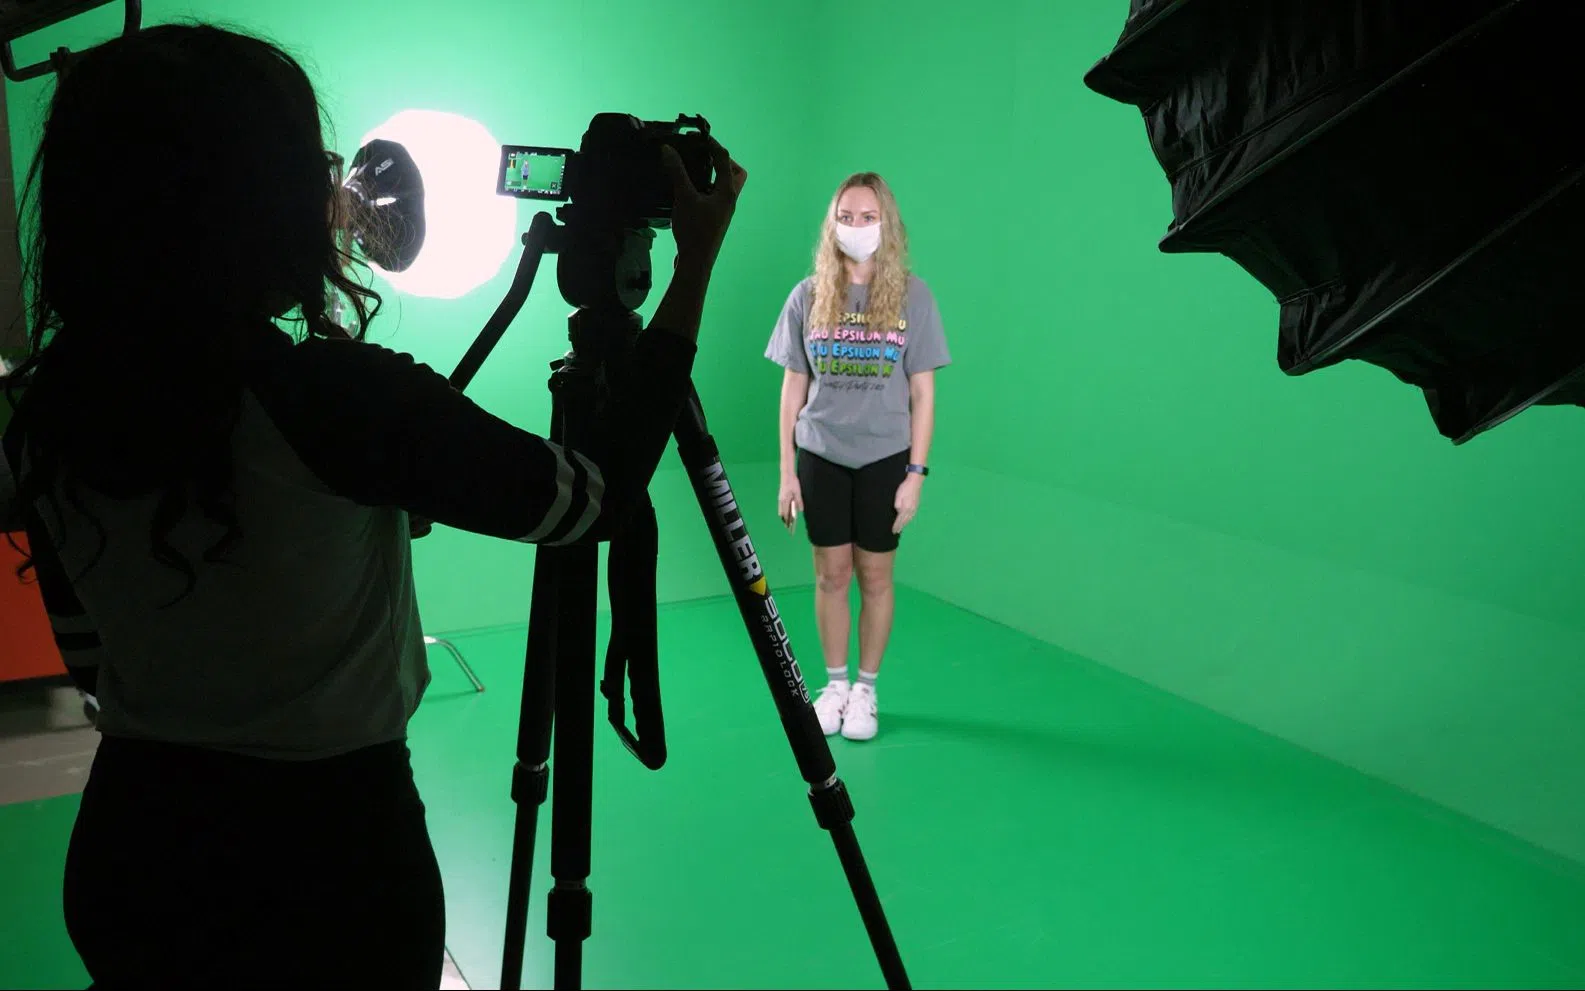 A person is being recorded in a bright green screen room